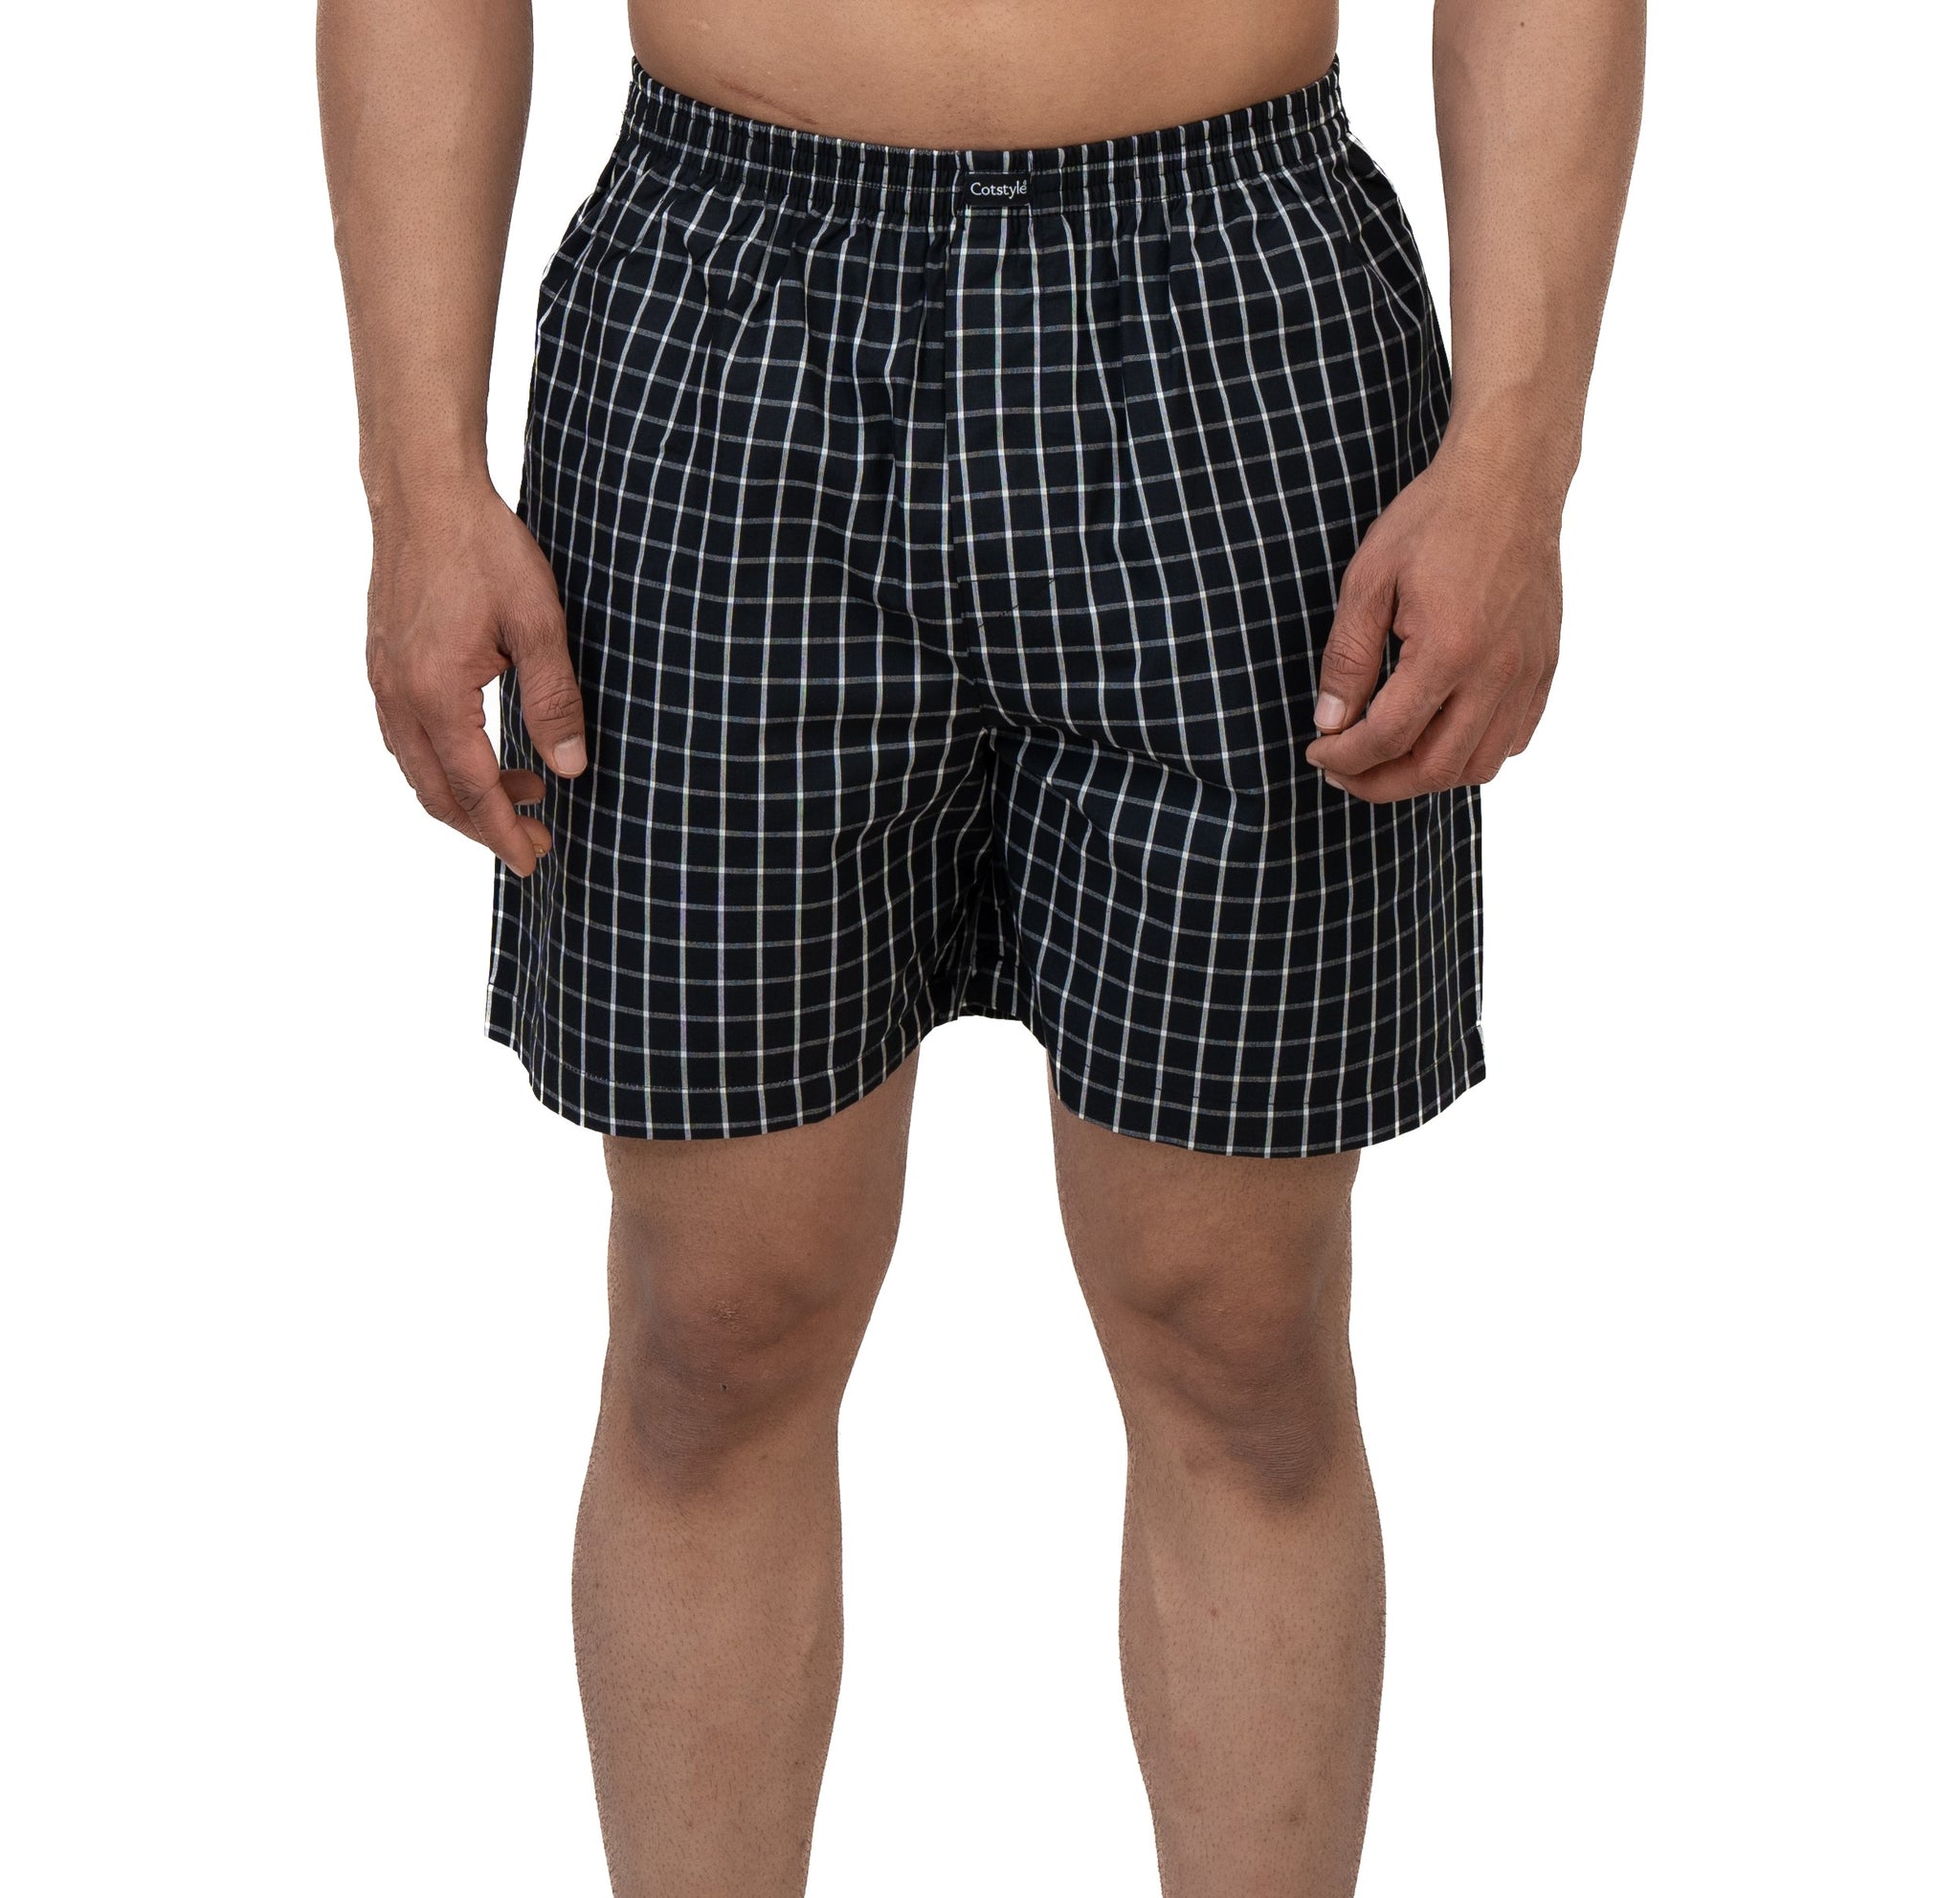 Cotstyle Grey & Black Colour Cotton Fabrics Checks Printed Above Knee Length Casuals Mens Wear Boxers - Pack of 2